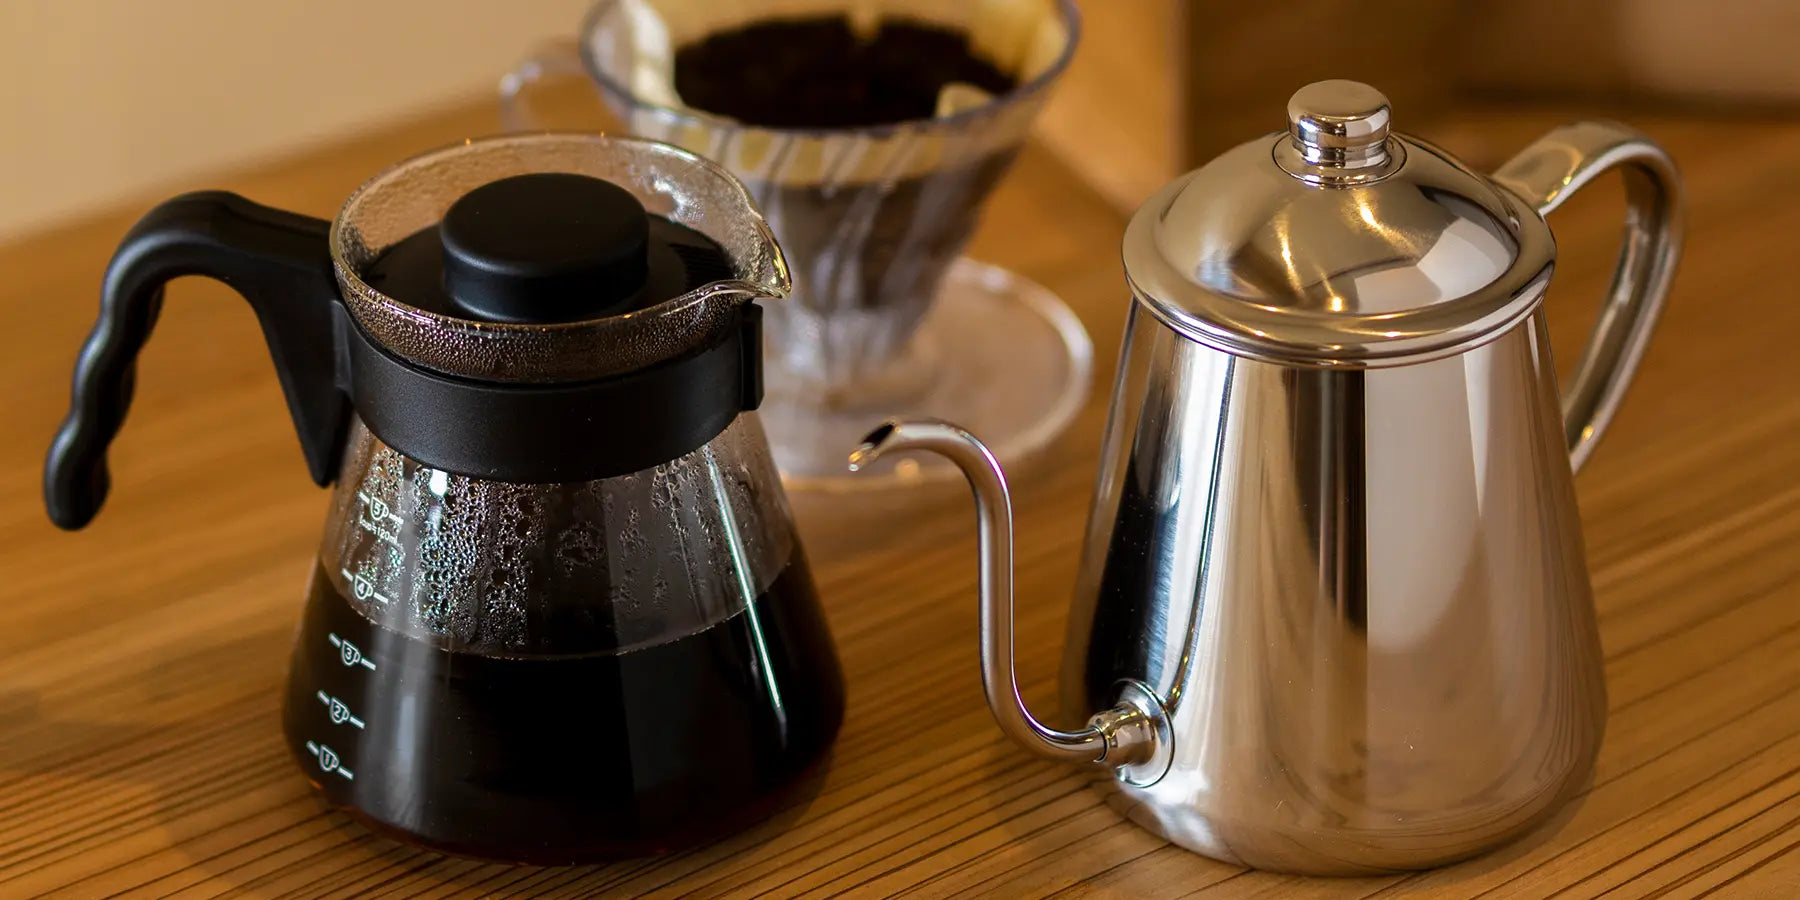 Discover our great selection of Coffee, Espresso, & Tea at Globalkitchen Japan.